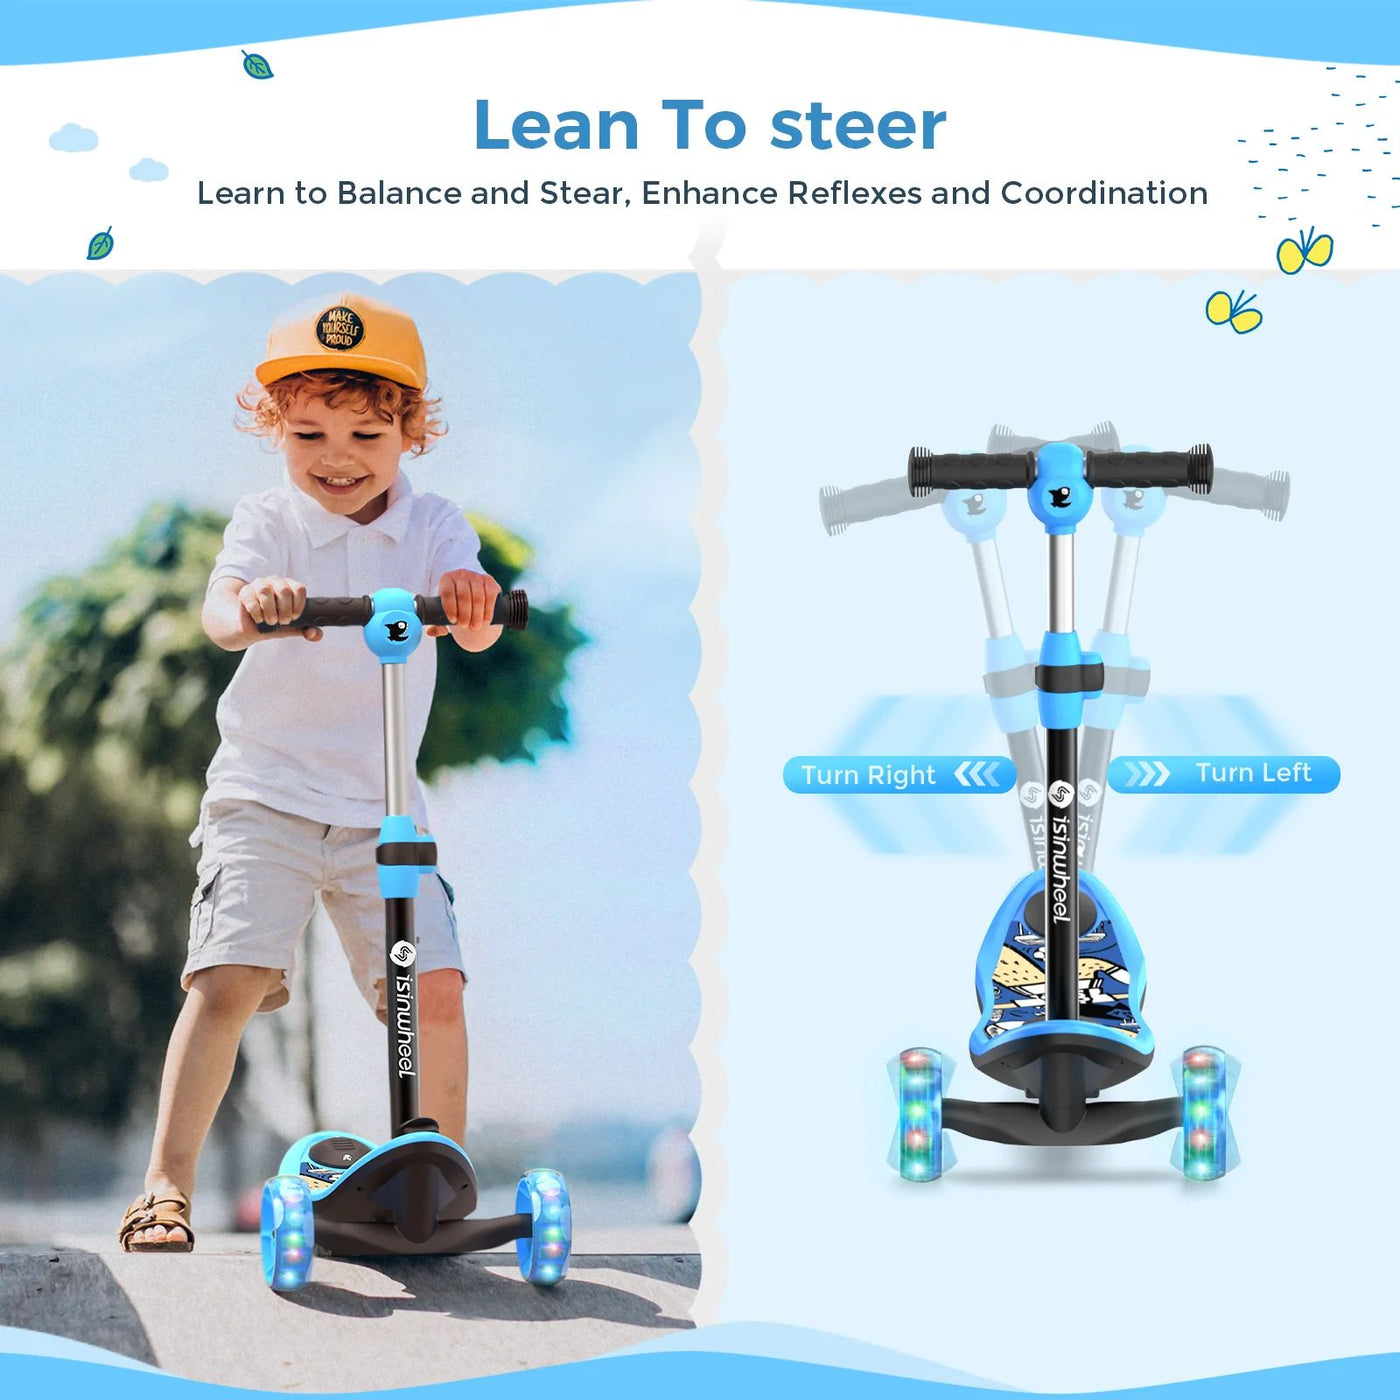 isinwheel M3 3 Wheel Kids Electric Scooter for boys aged 3-12 deal